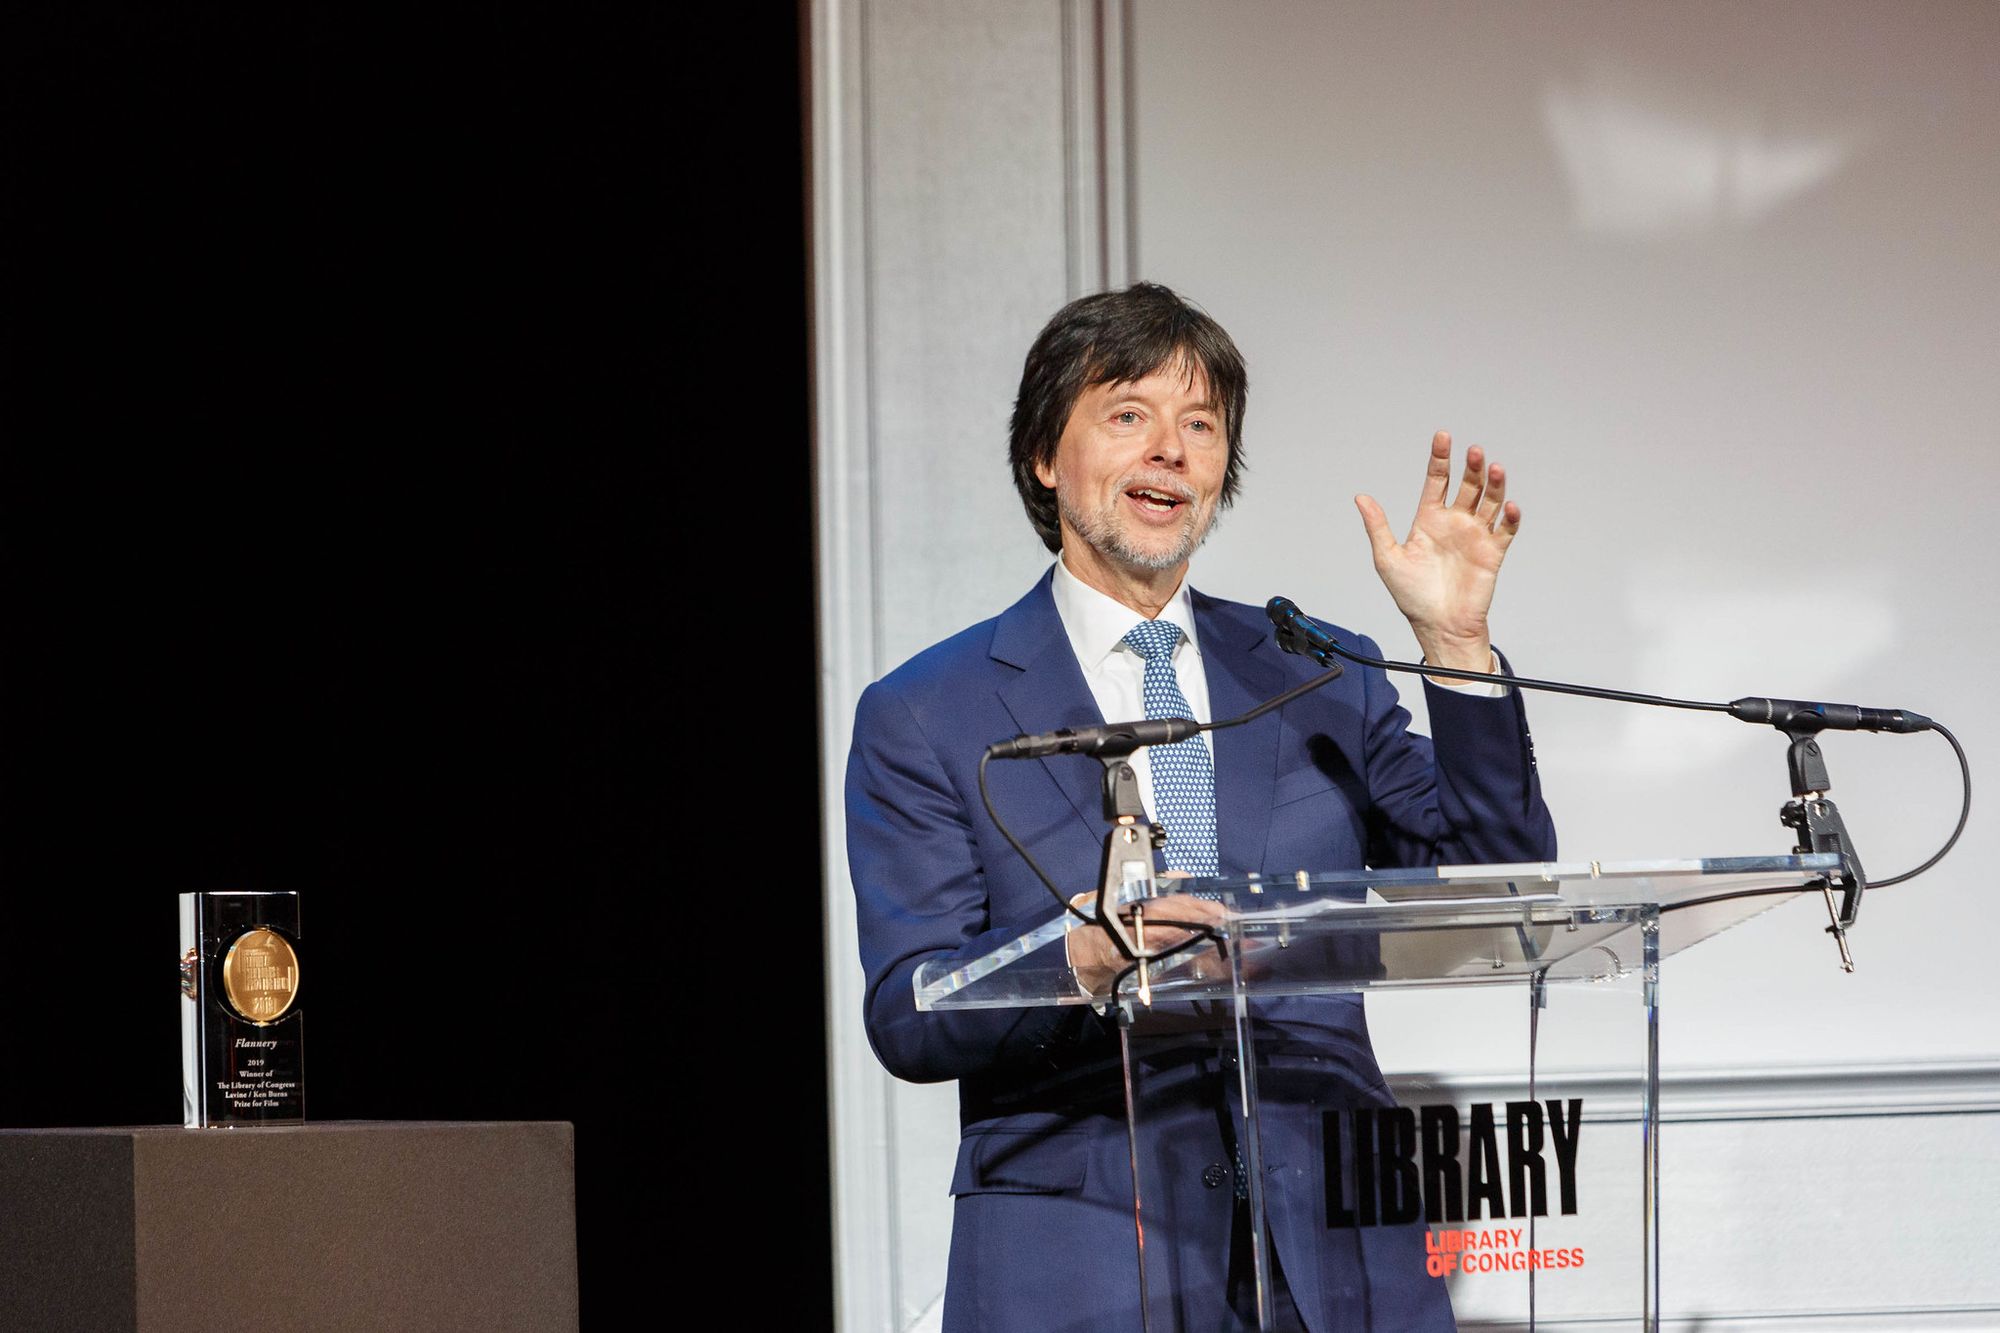 What Ken Burns hopes Americans will find in his new Holocaust film